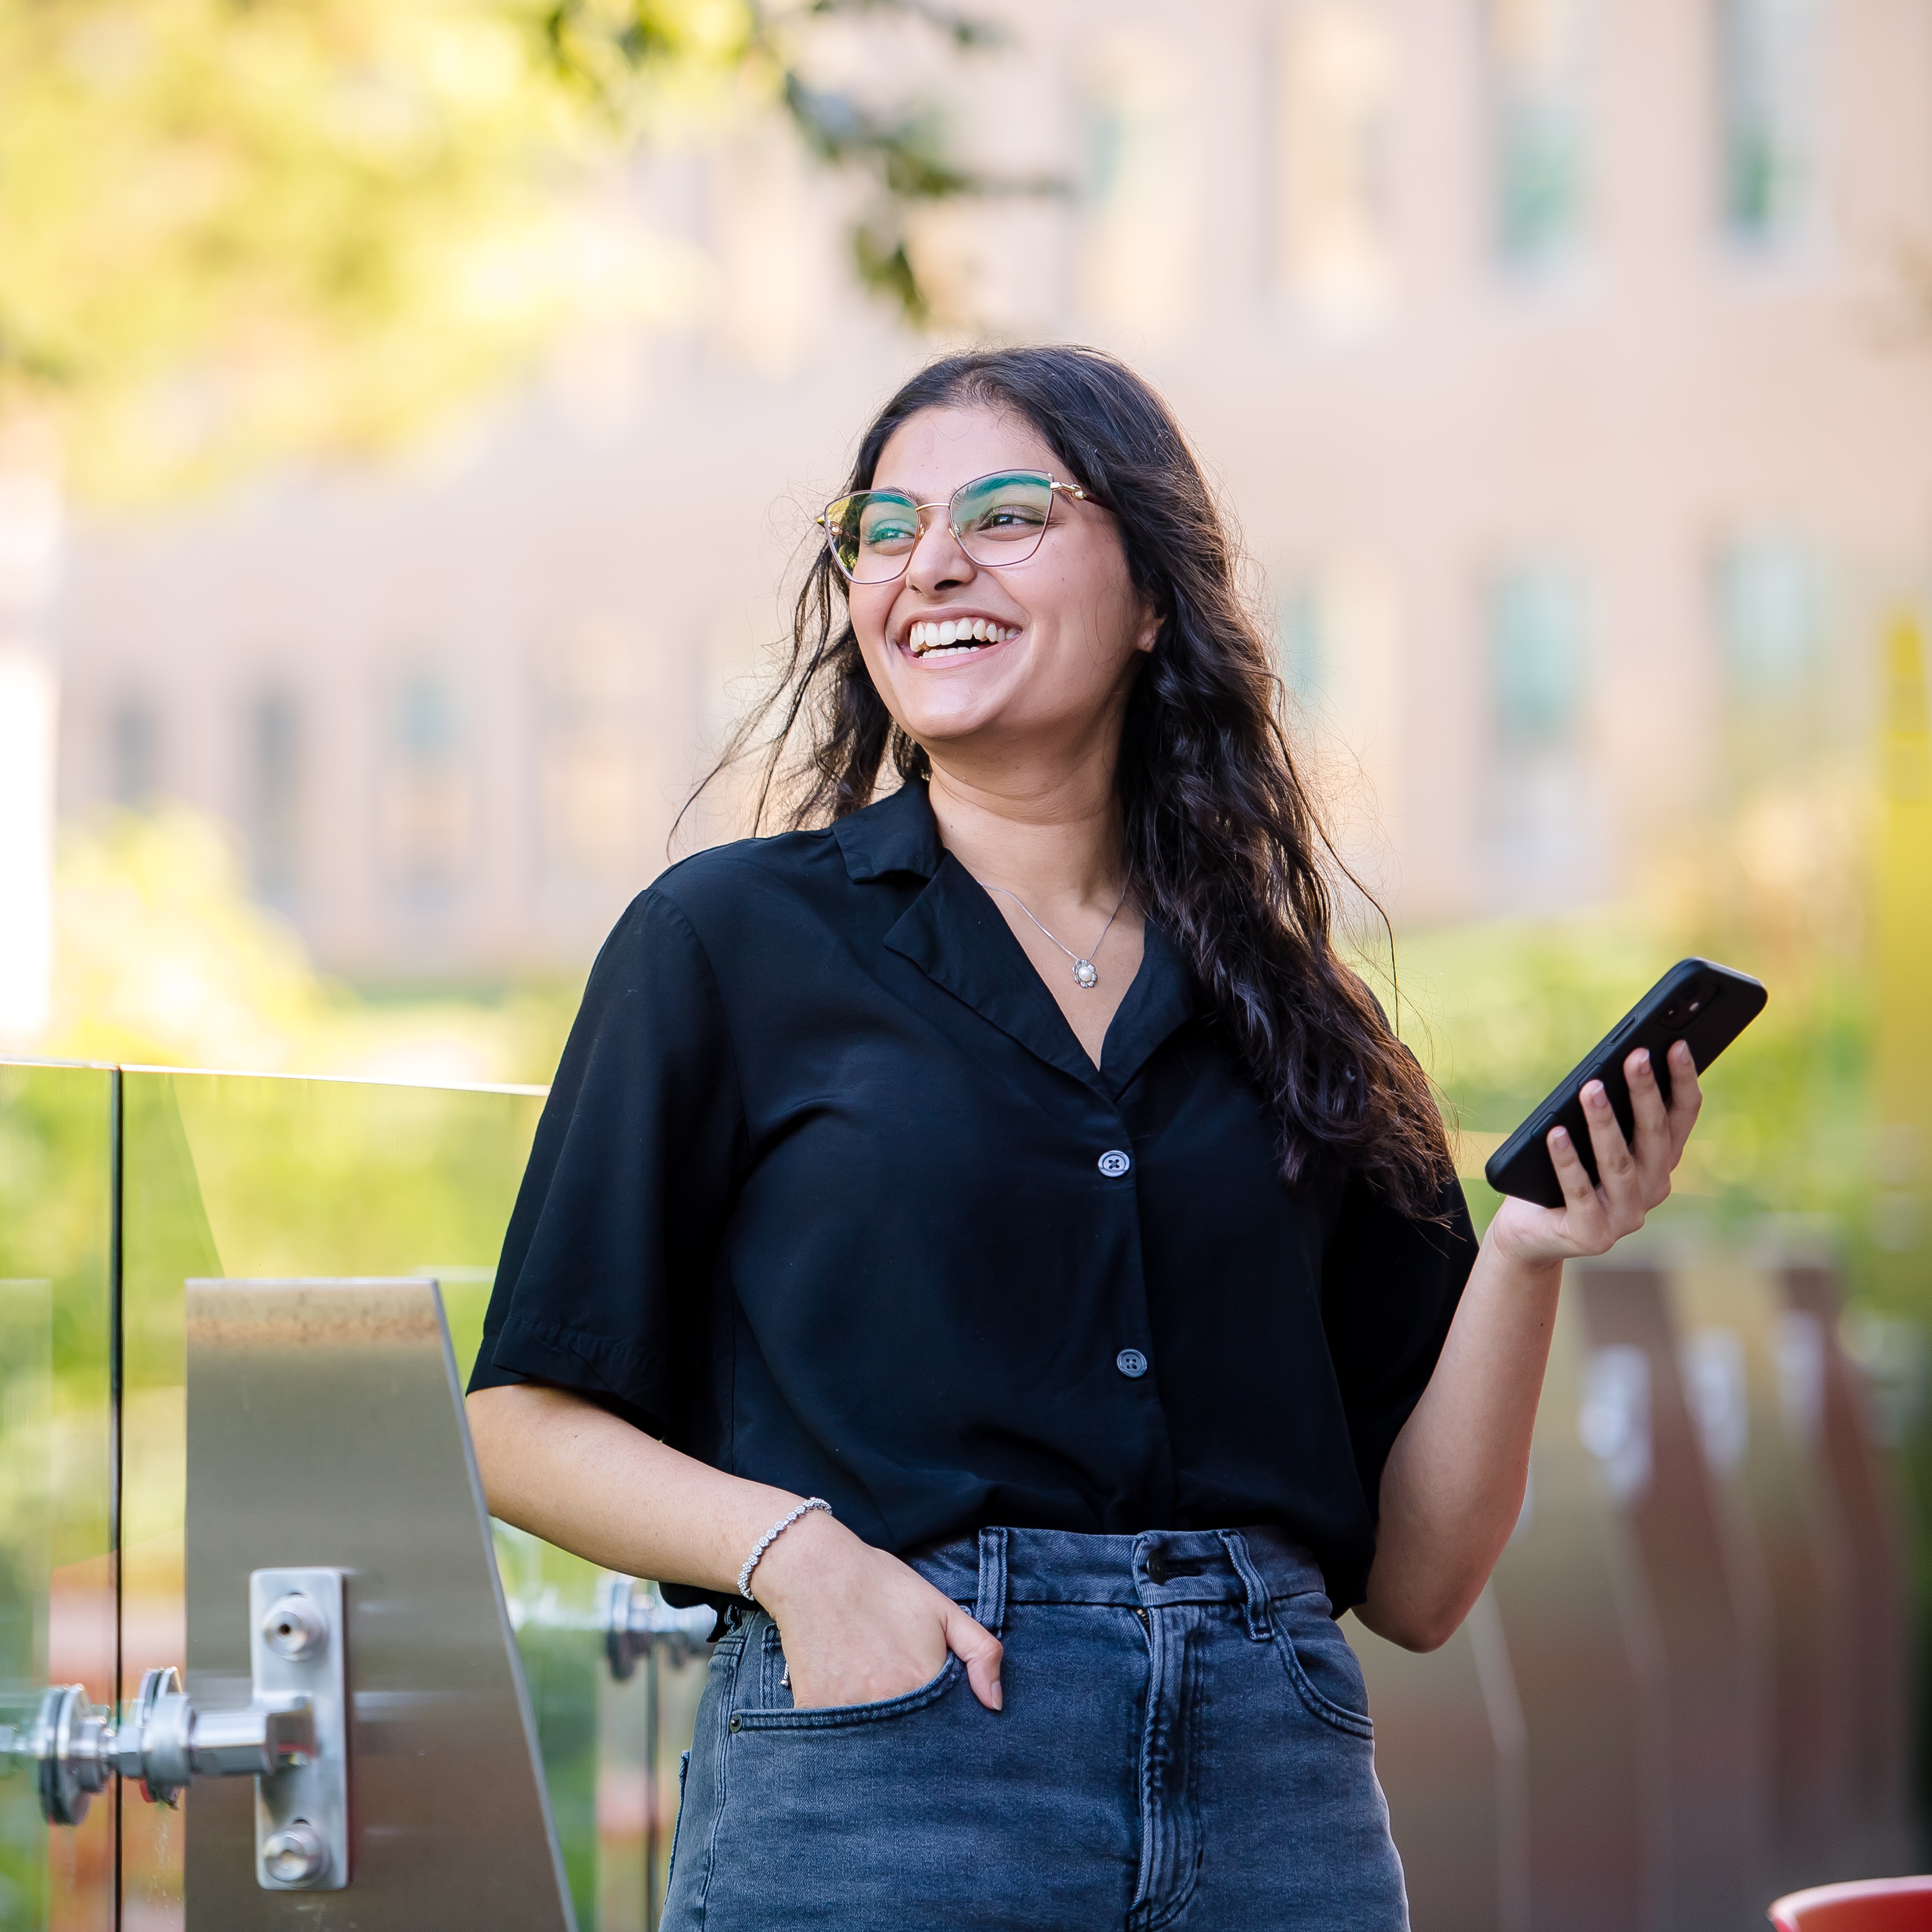 Capital One CODA associate stands outside holding her phone and smiling